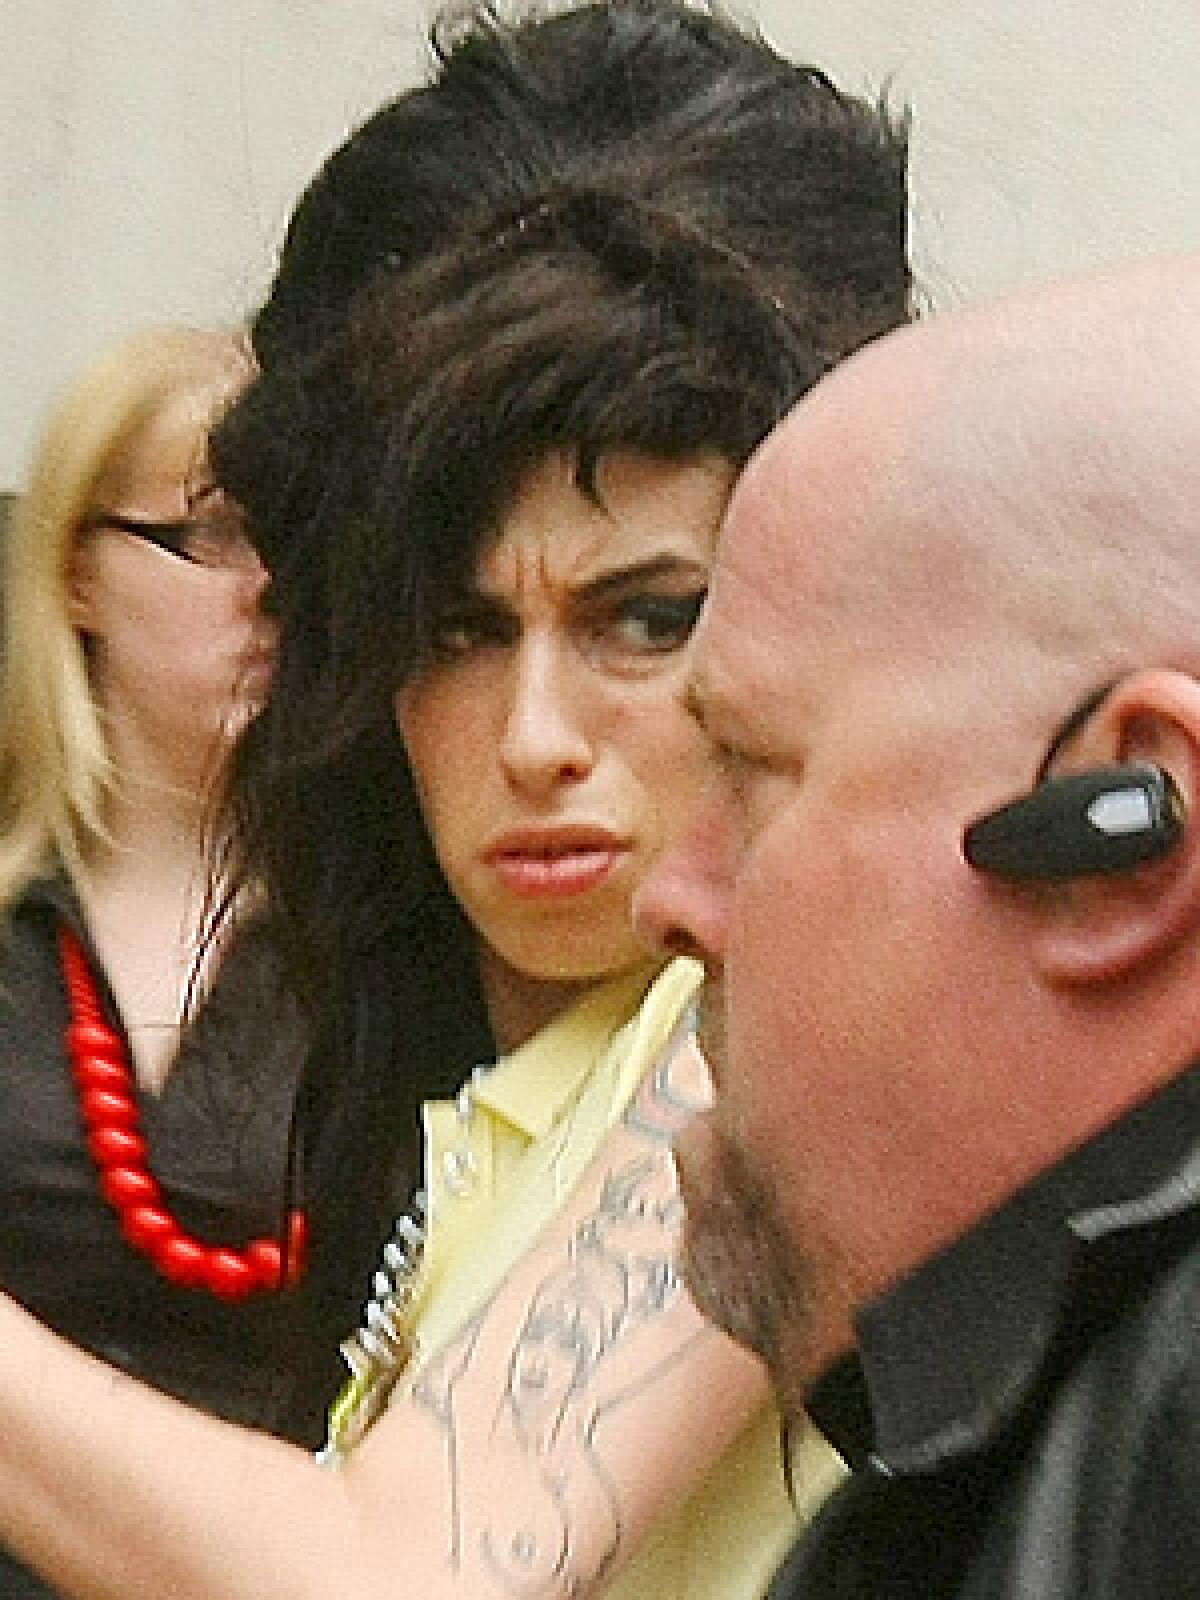 Amy Winehouse spokesman Chris Goodman said police had finished their investigation and confirmed no charges would be brought against the 24-year-old singer.